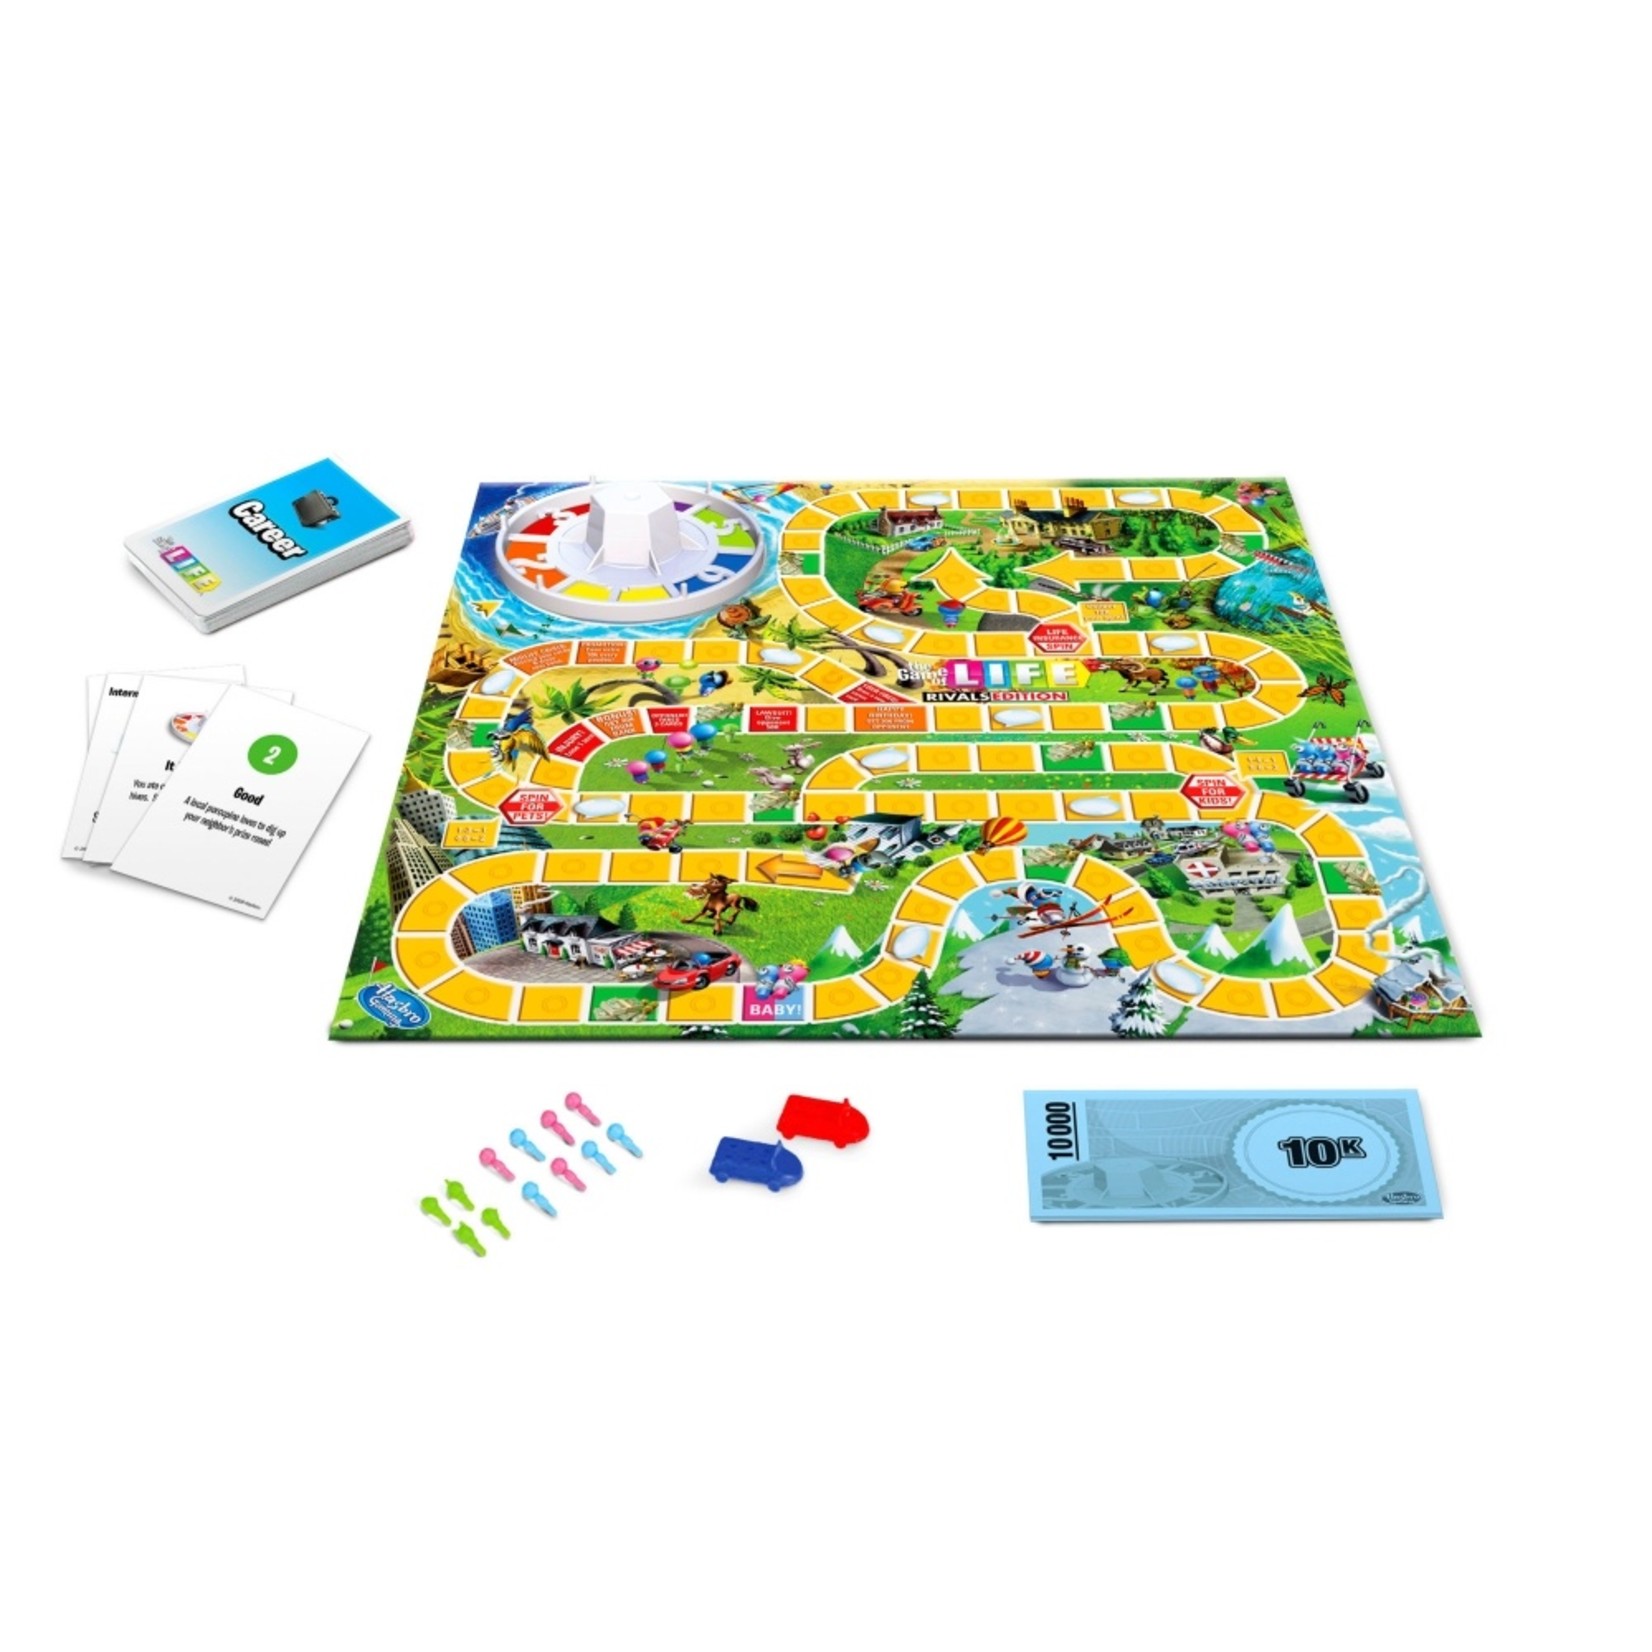 Hasbro Game of Life Rivals Edition